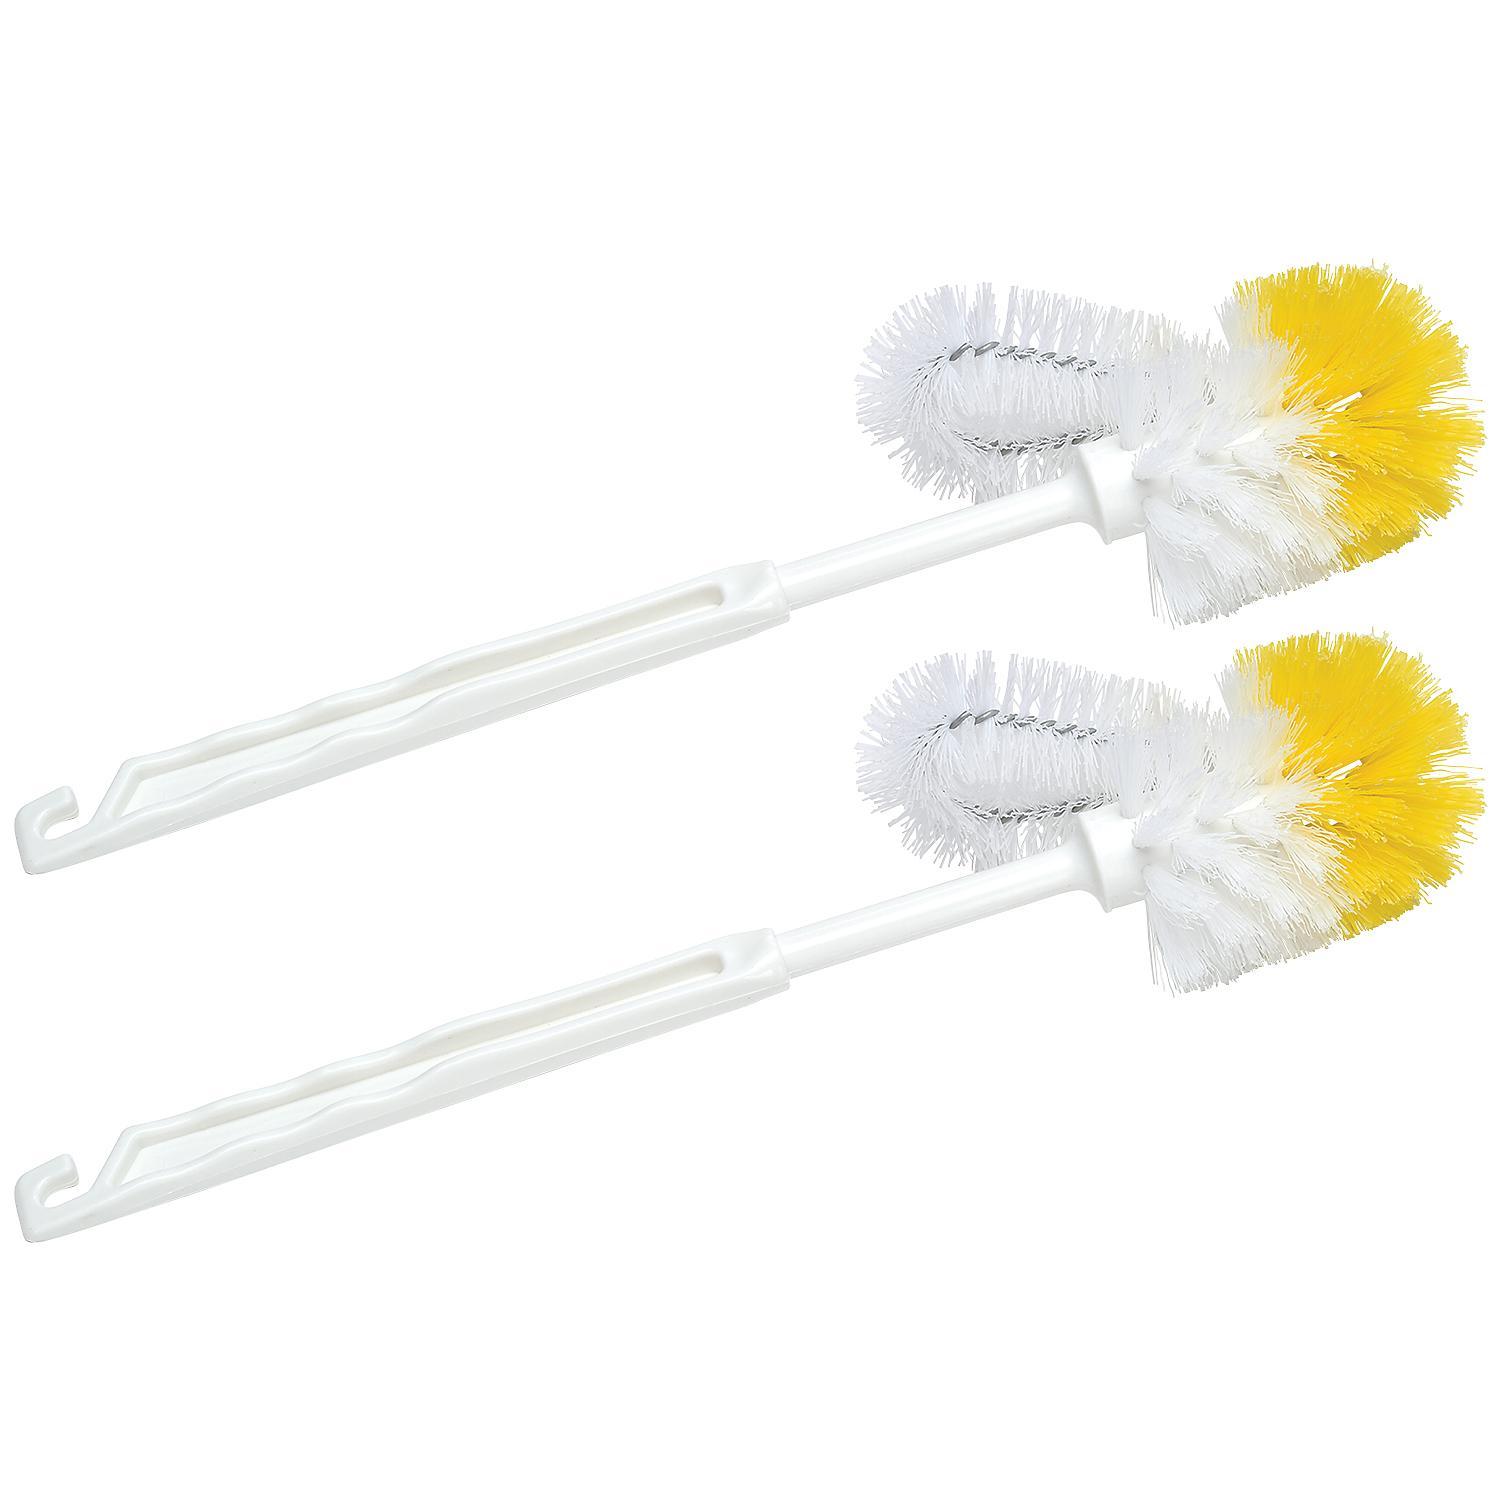 Toilet Brush Specially Made for Use on Recreational Vehicles and Boats